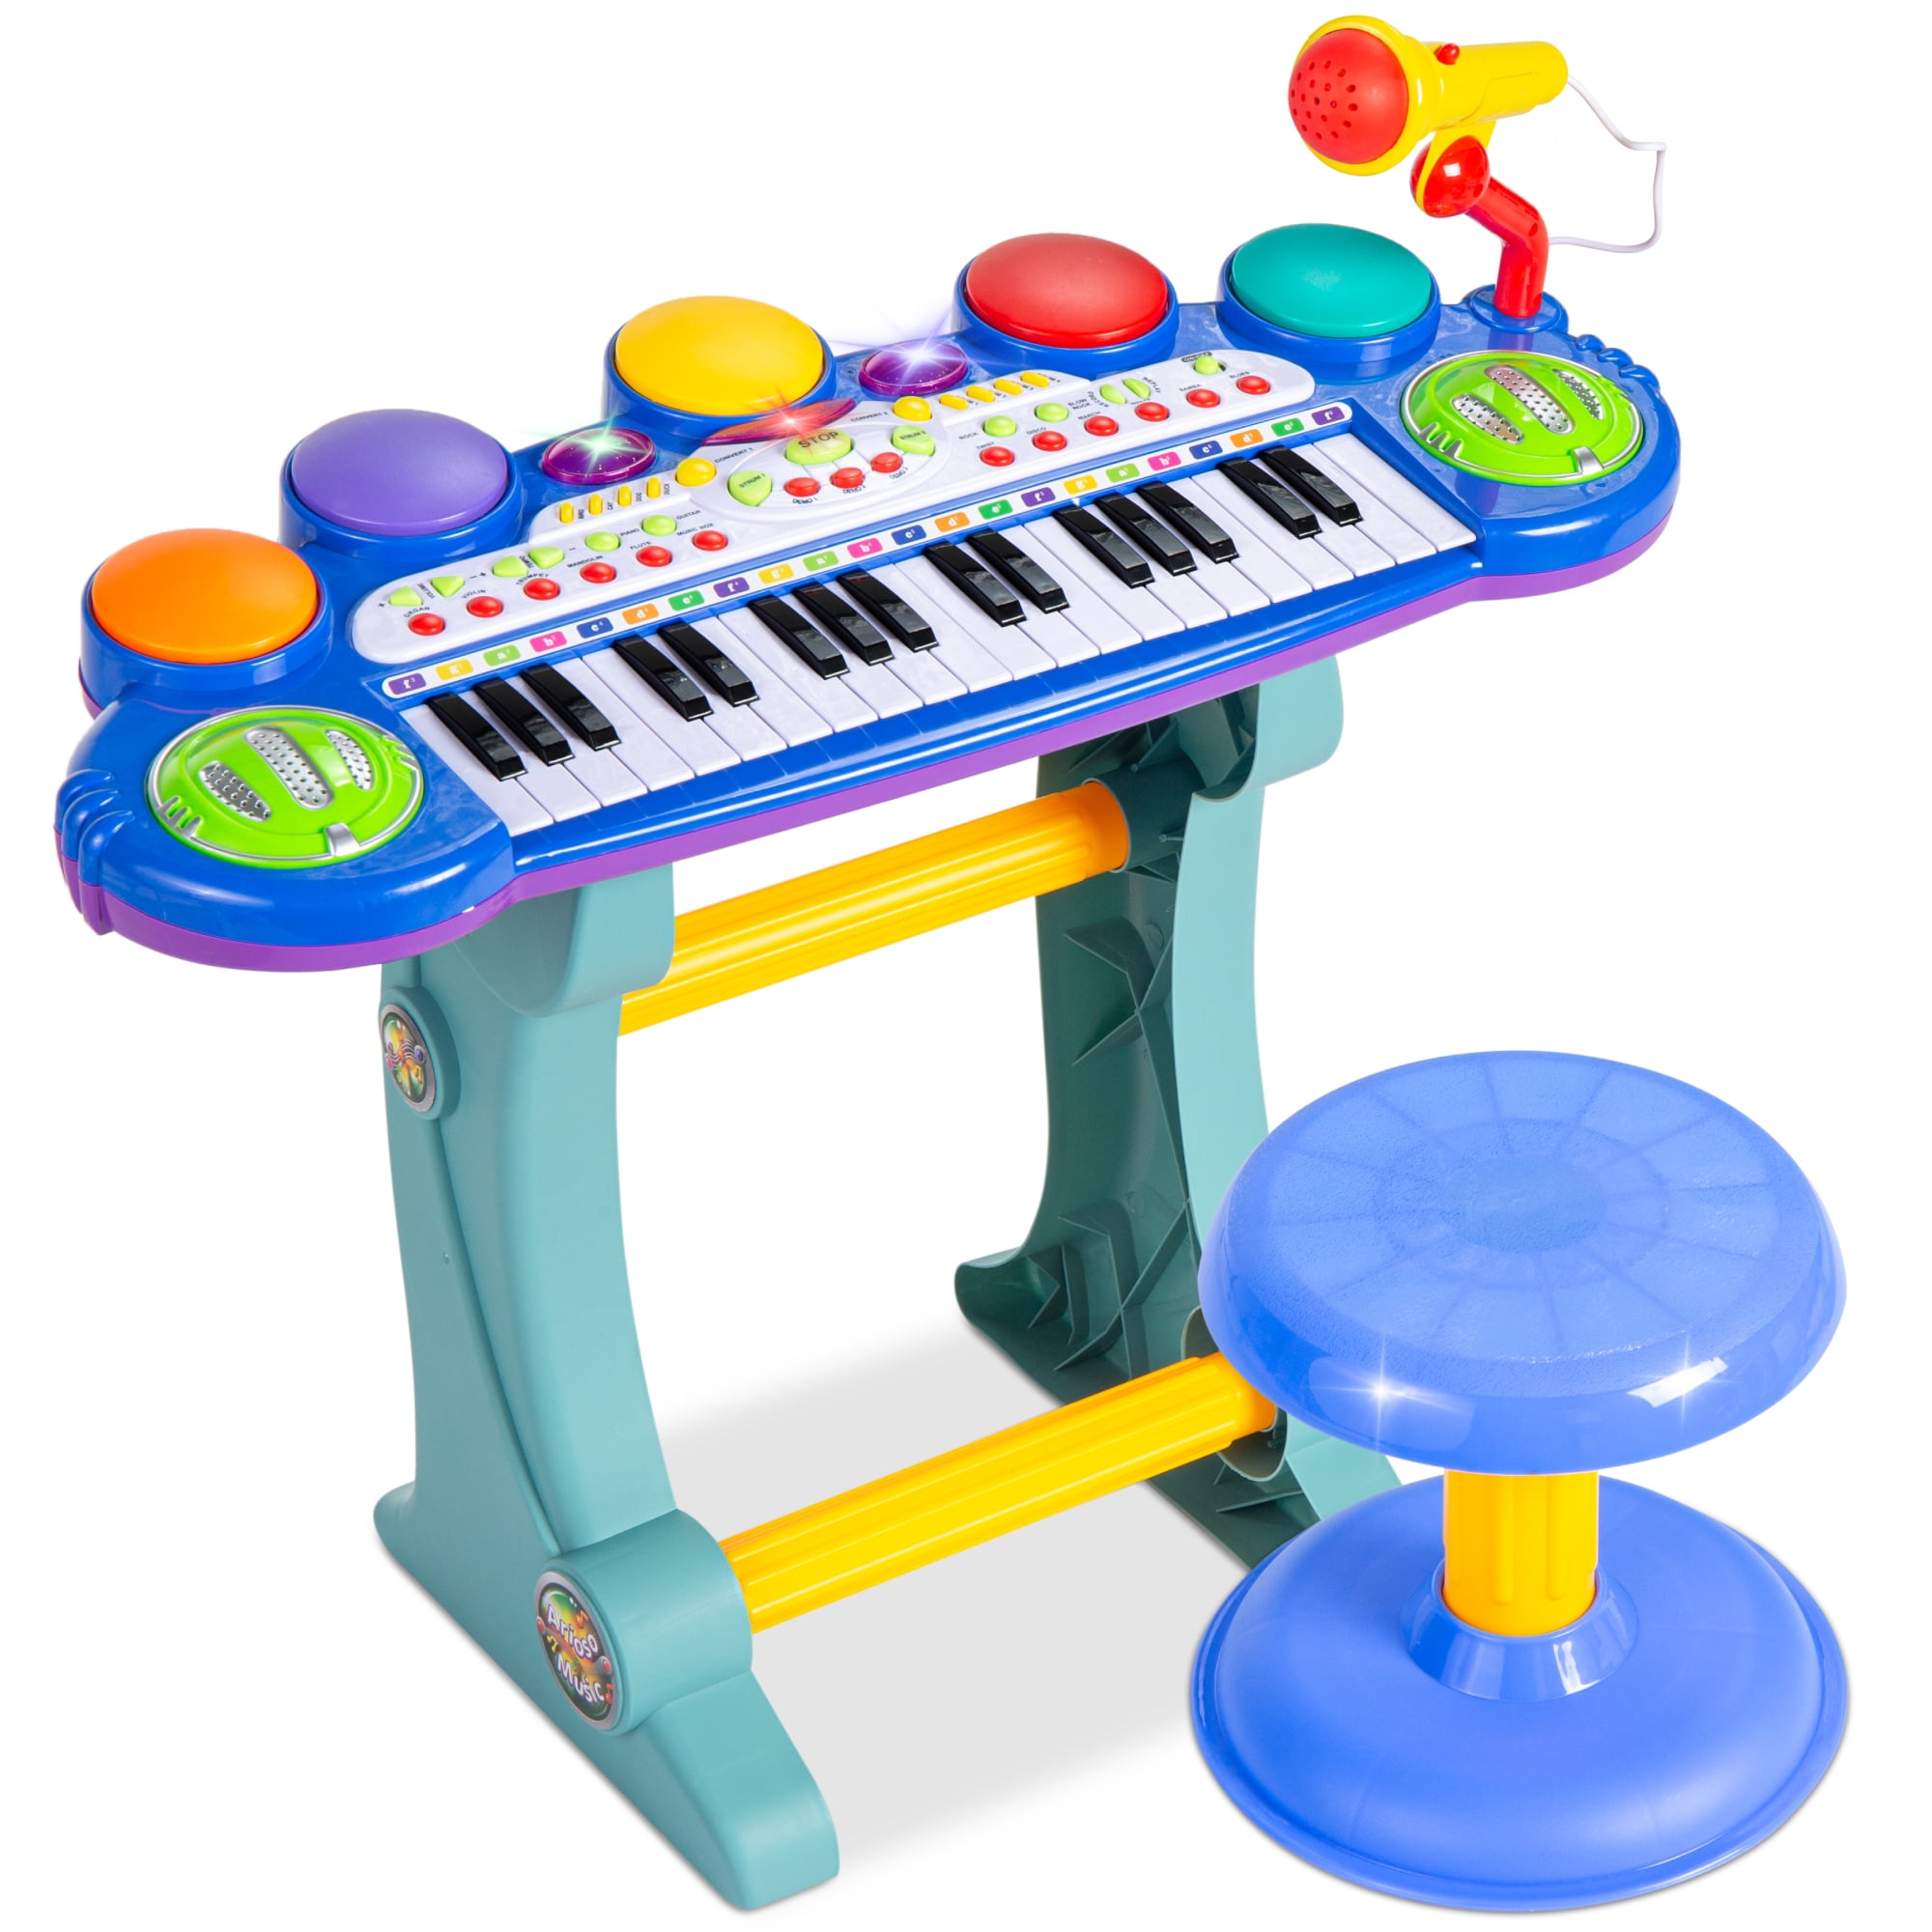 Blue Electronic Music Keyboard With Lights And Sounds Kid Toy 